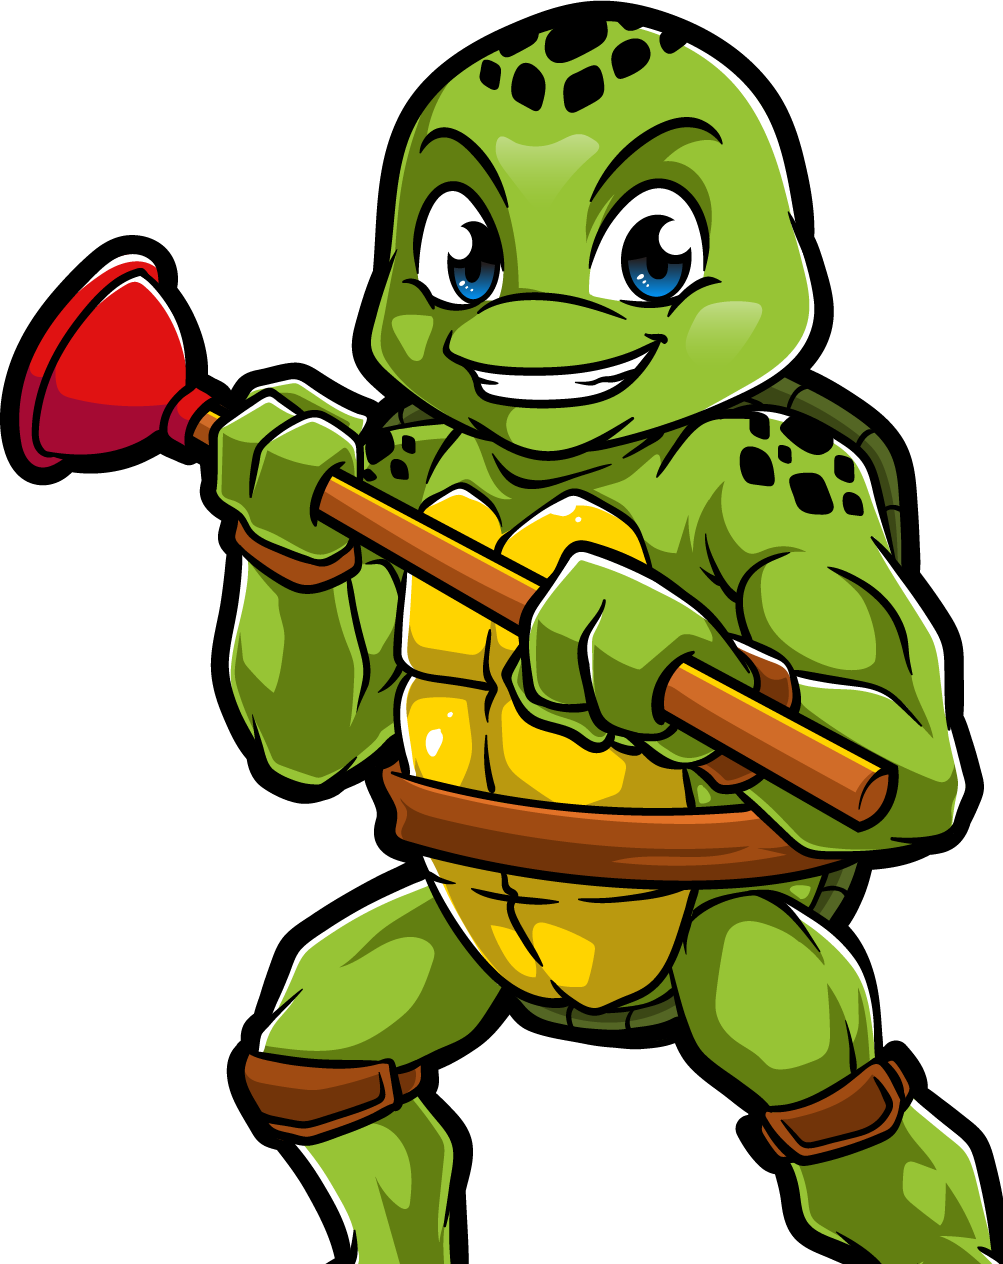 a cartoon turtle is holding a red plunger